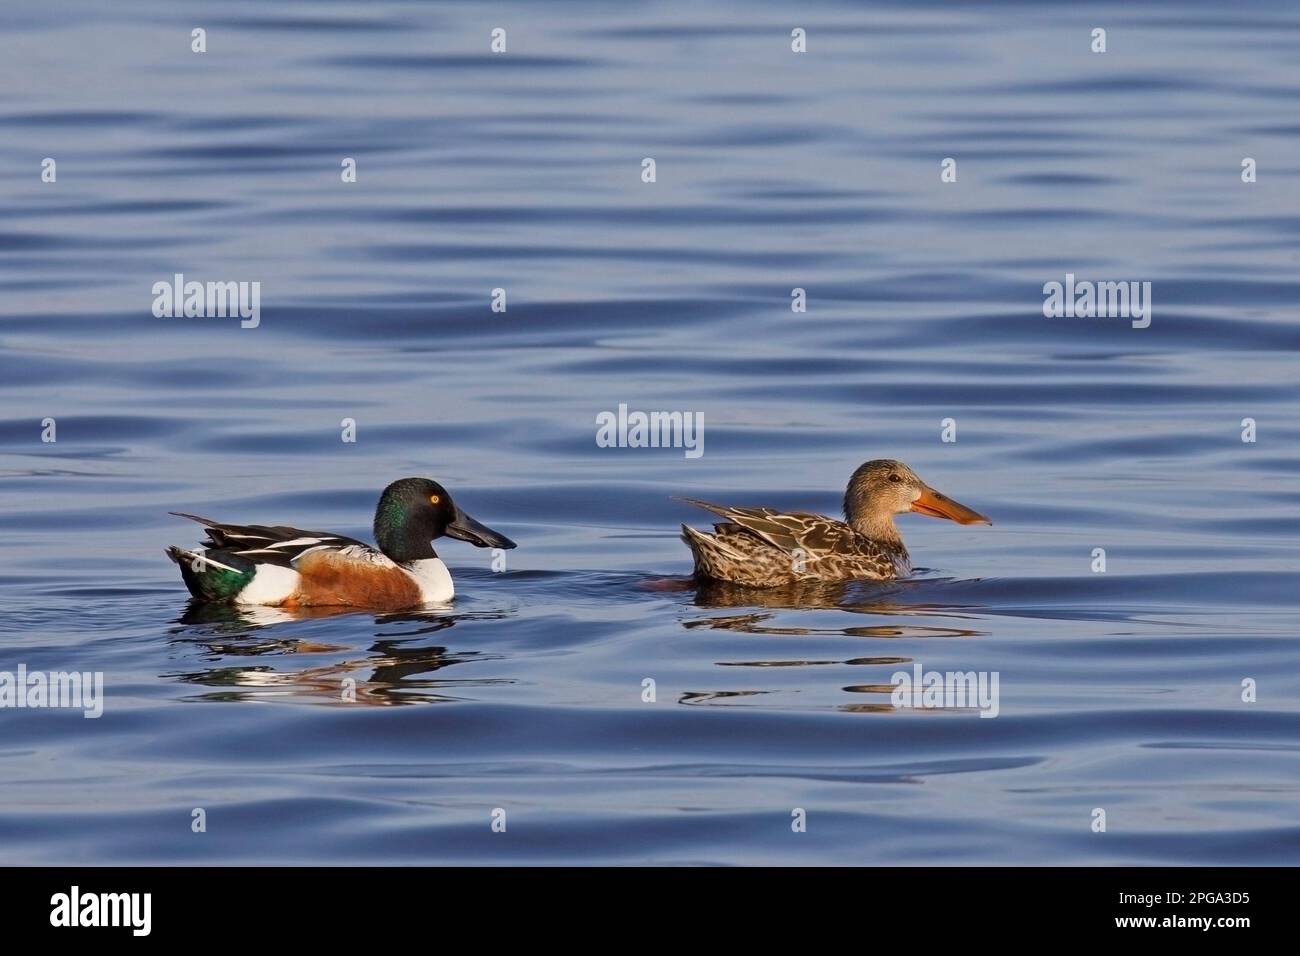 Northern Shoveler duck pair swimming in blue water at Frank Lake Conservation Area, Alberta, Canada. Anas clypeata Stock Photo